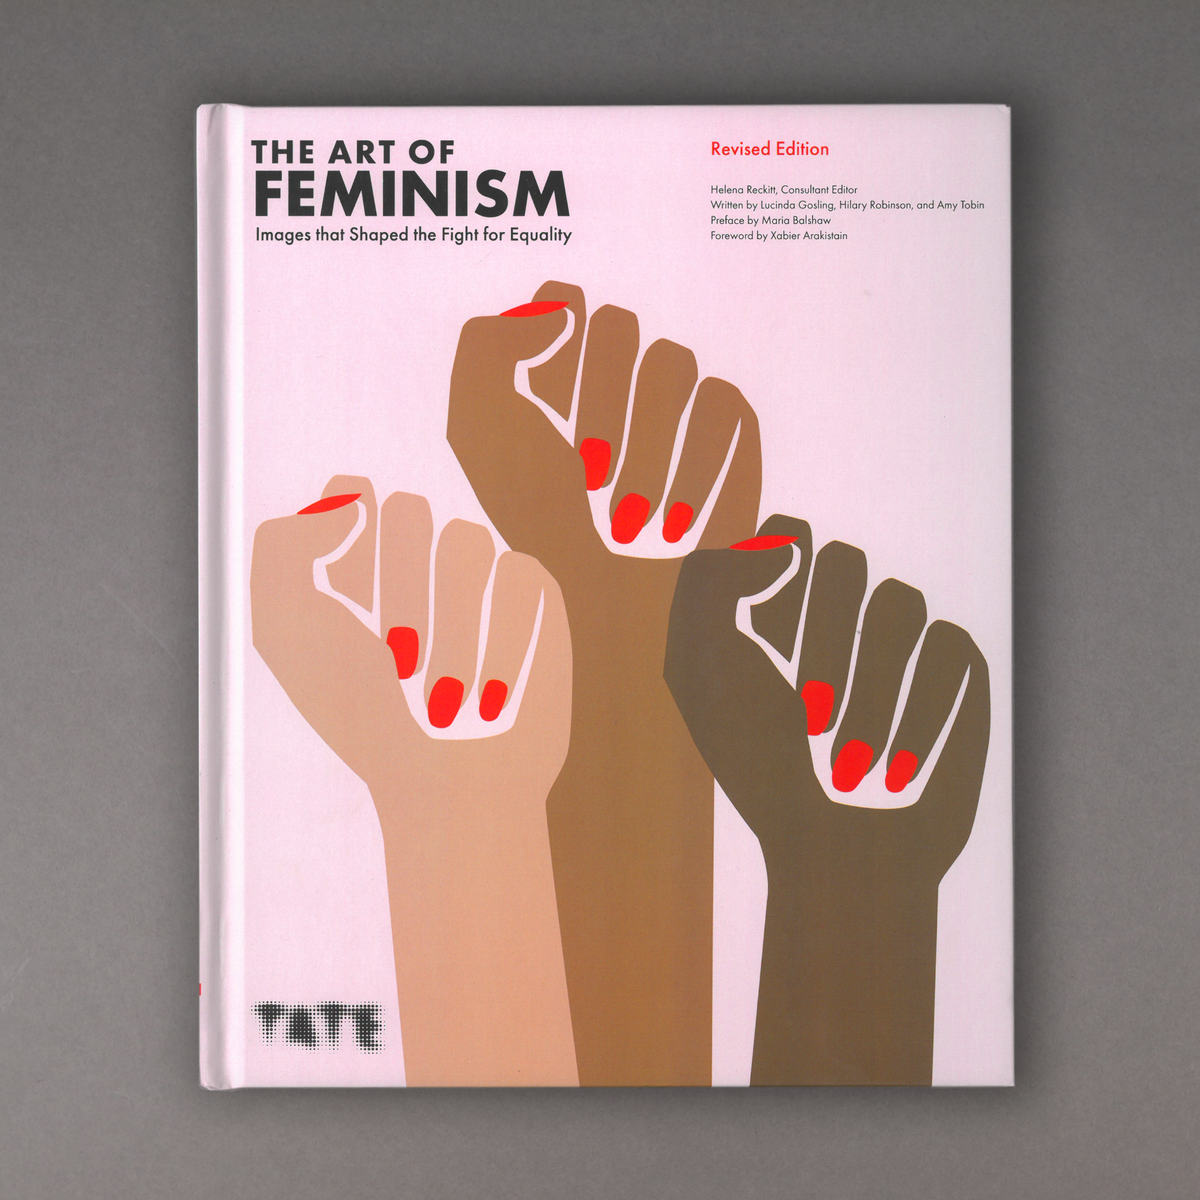 The Art of Feminism (revised edition)